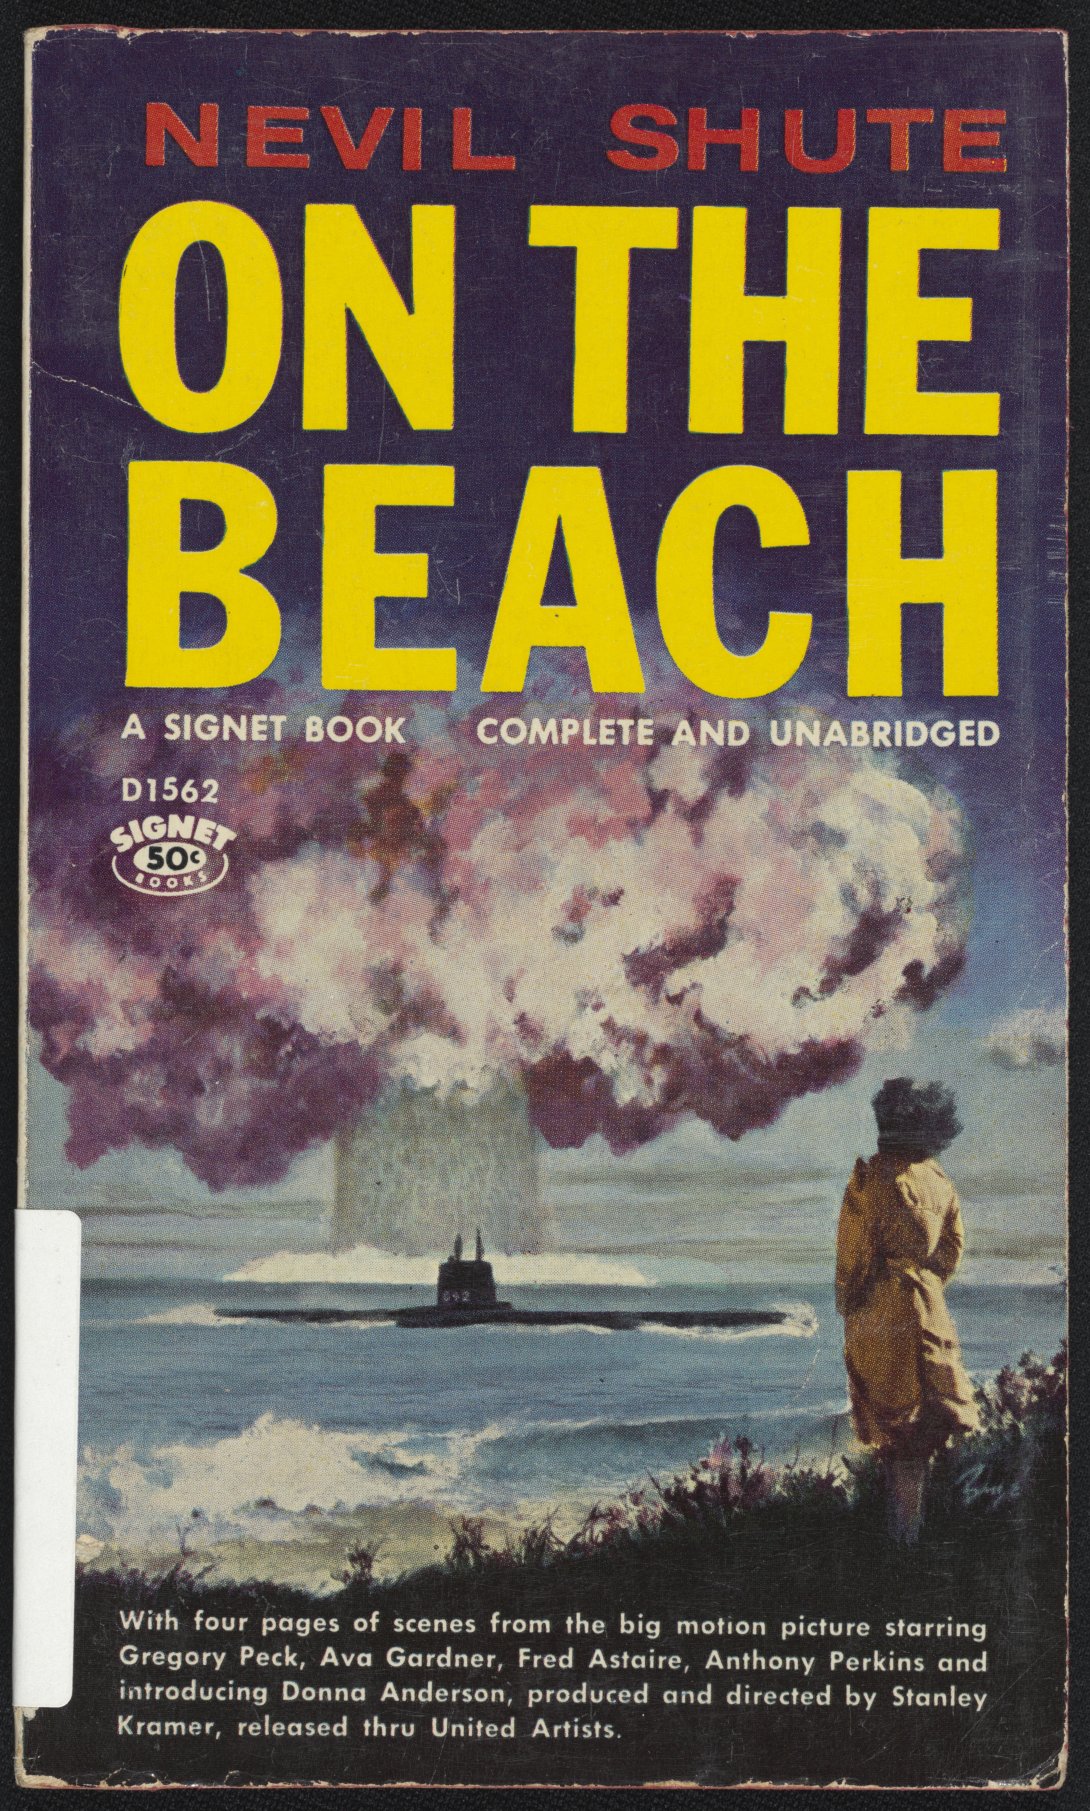 Book cover showing a woman standing on the shore, watching a mushroom cloud come up from the sea. The name of the book 'On the beach' is in large yellow text below the author's name 'Nevil Shute' in red text